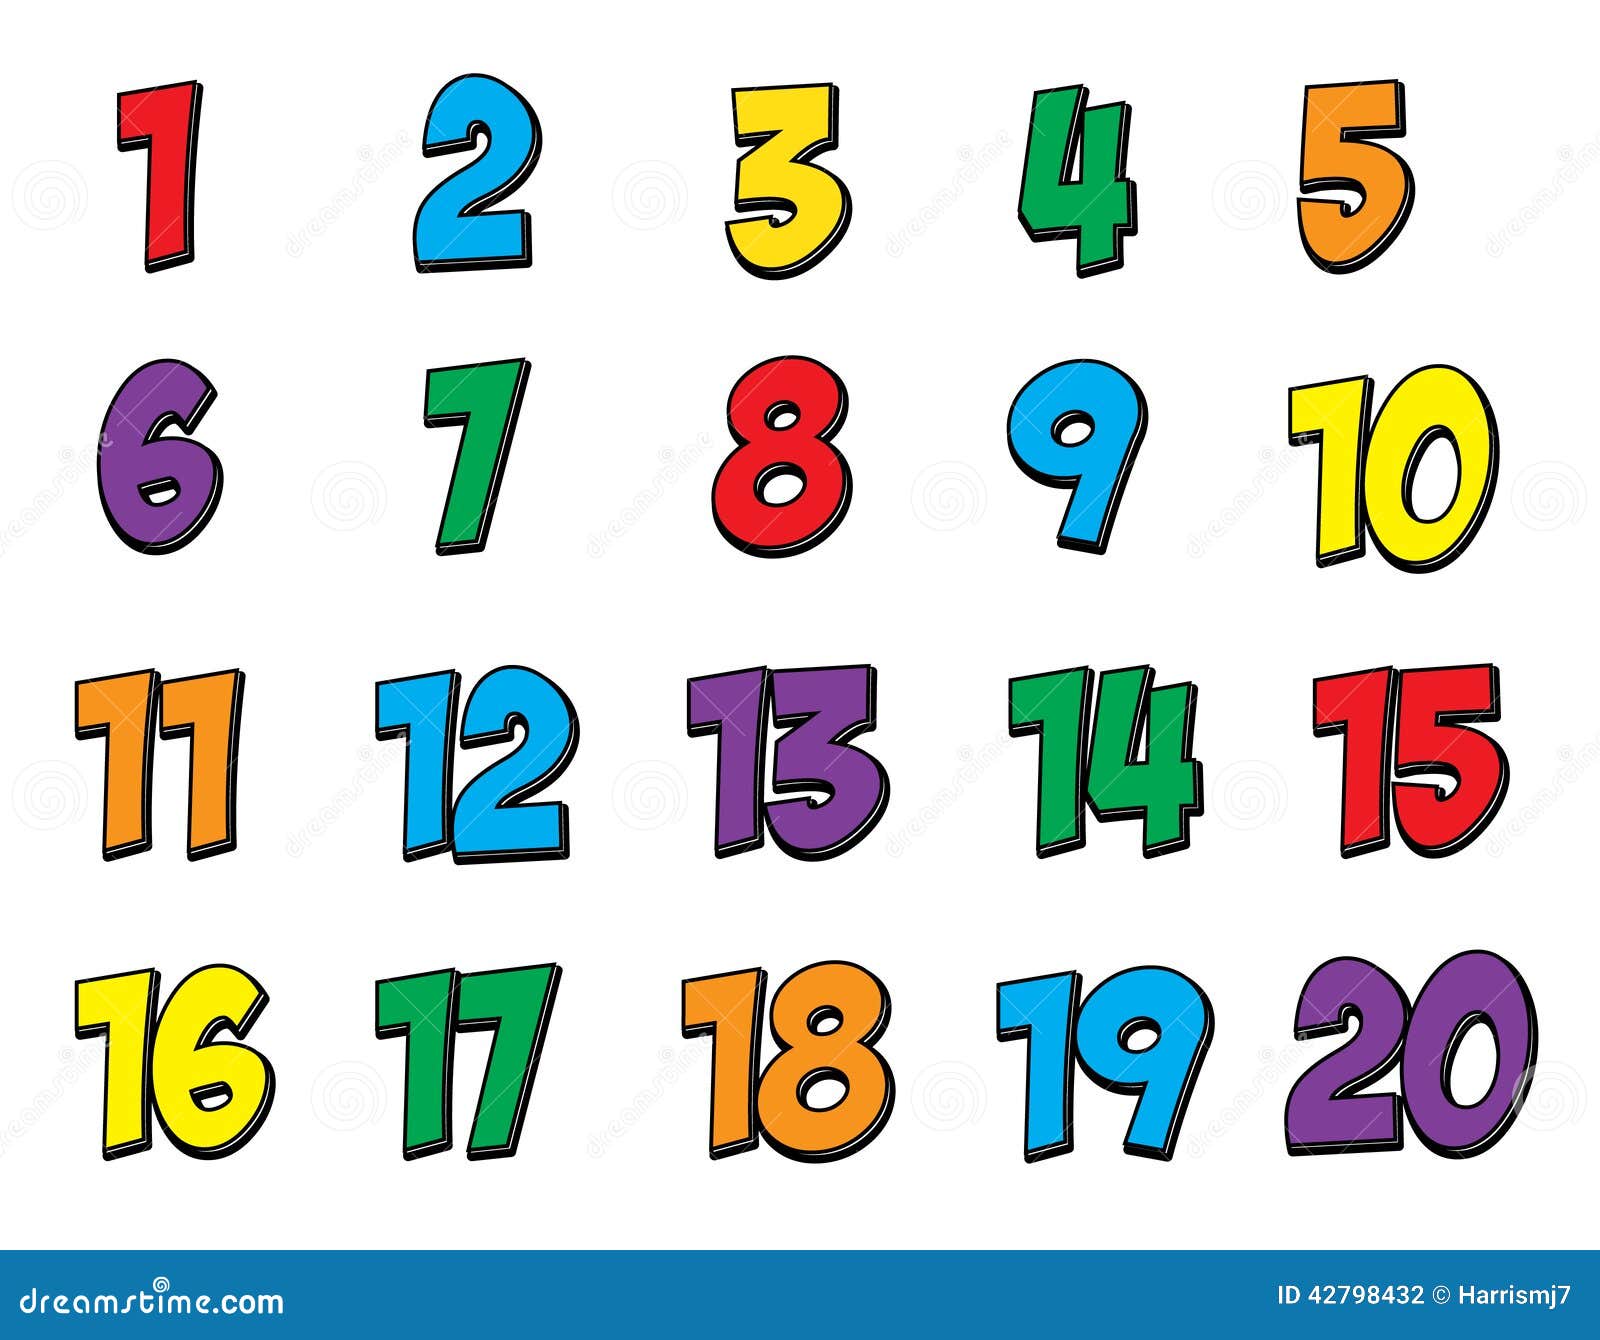 free clip art numbers 1 20 - photo #36